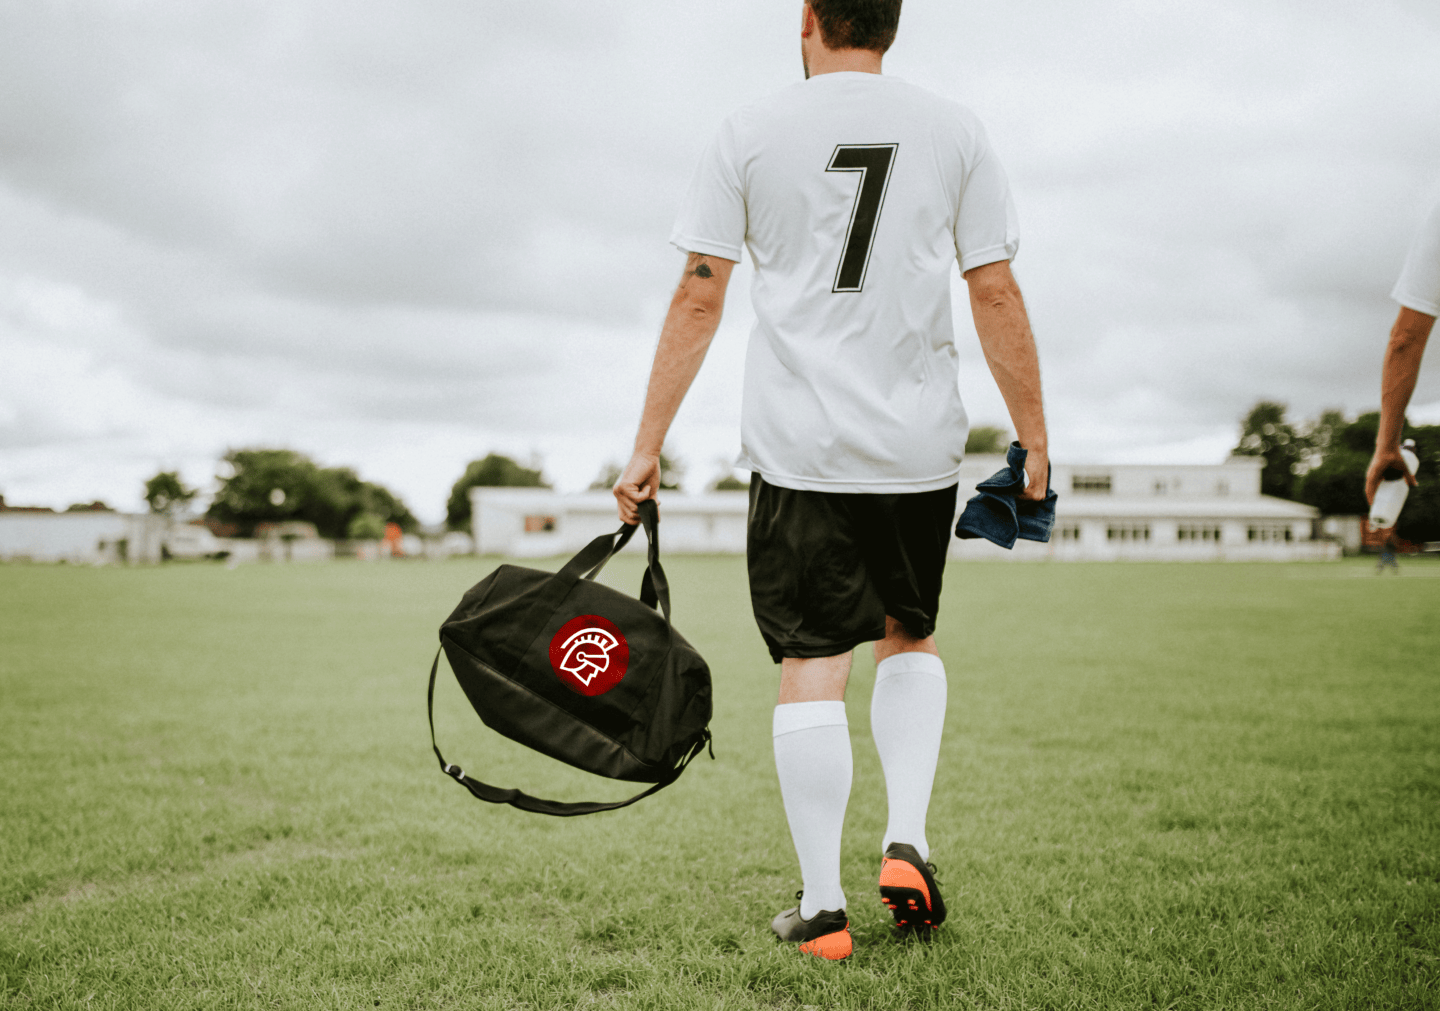 Two soccer players walk away across a field while carrying a Safeguard branded duffle bag.